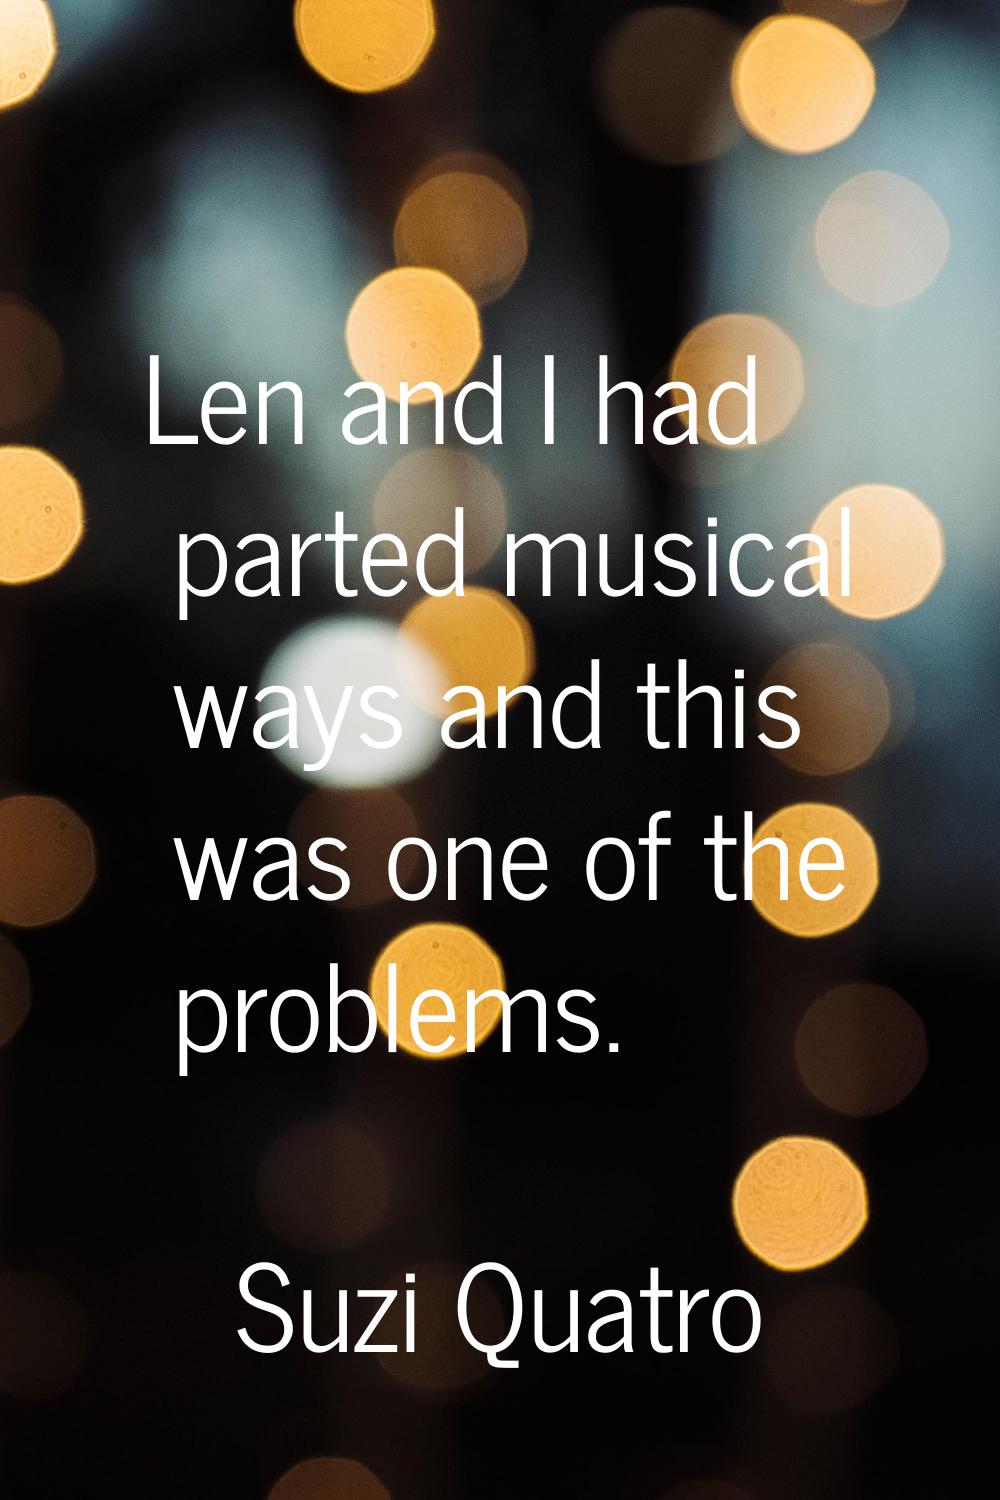 Len and I had parted musical ways and this was one of the problems.